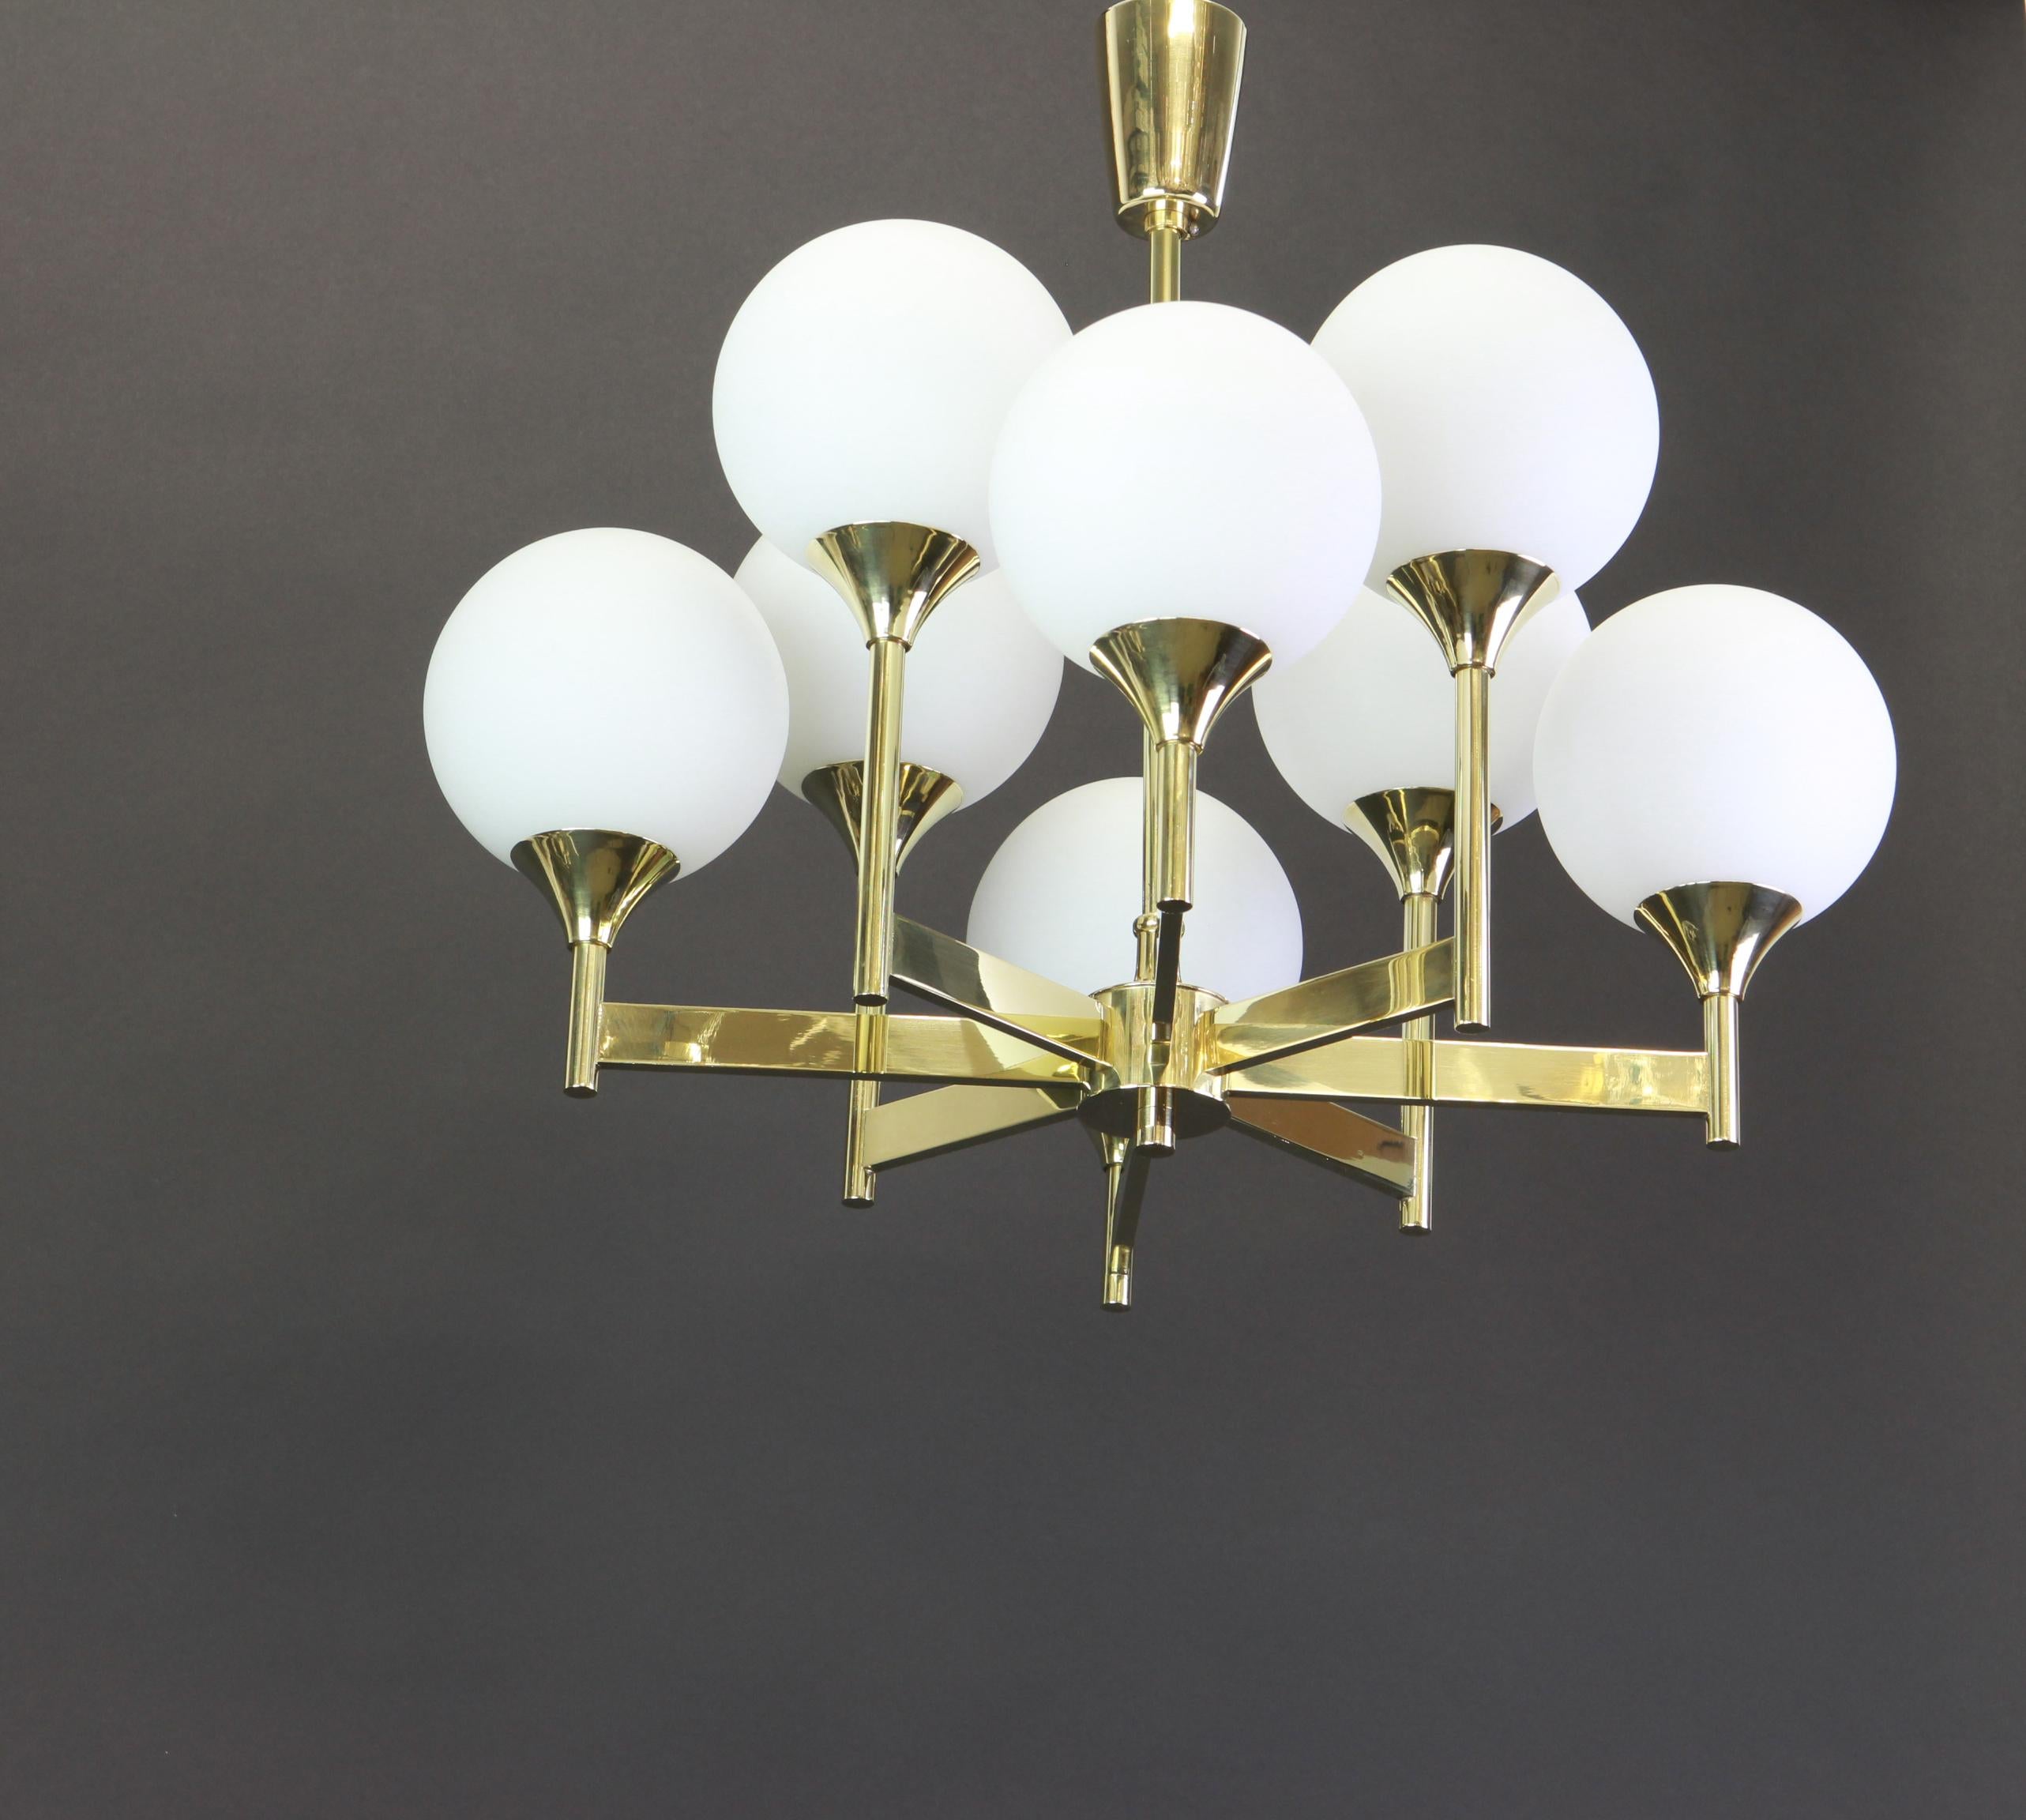 Stunning Sputnik brass chandelier with eight opal glass globes by Kaiser Leuchten, Germany, 1960s.

Heavy quality and in very good condition. Cleaned, well-wired and ready to use. 

The fixture requires eight E14 small bulbs with 40W max